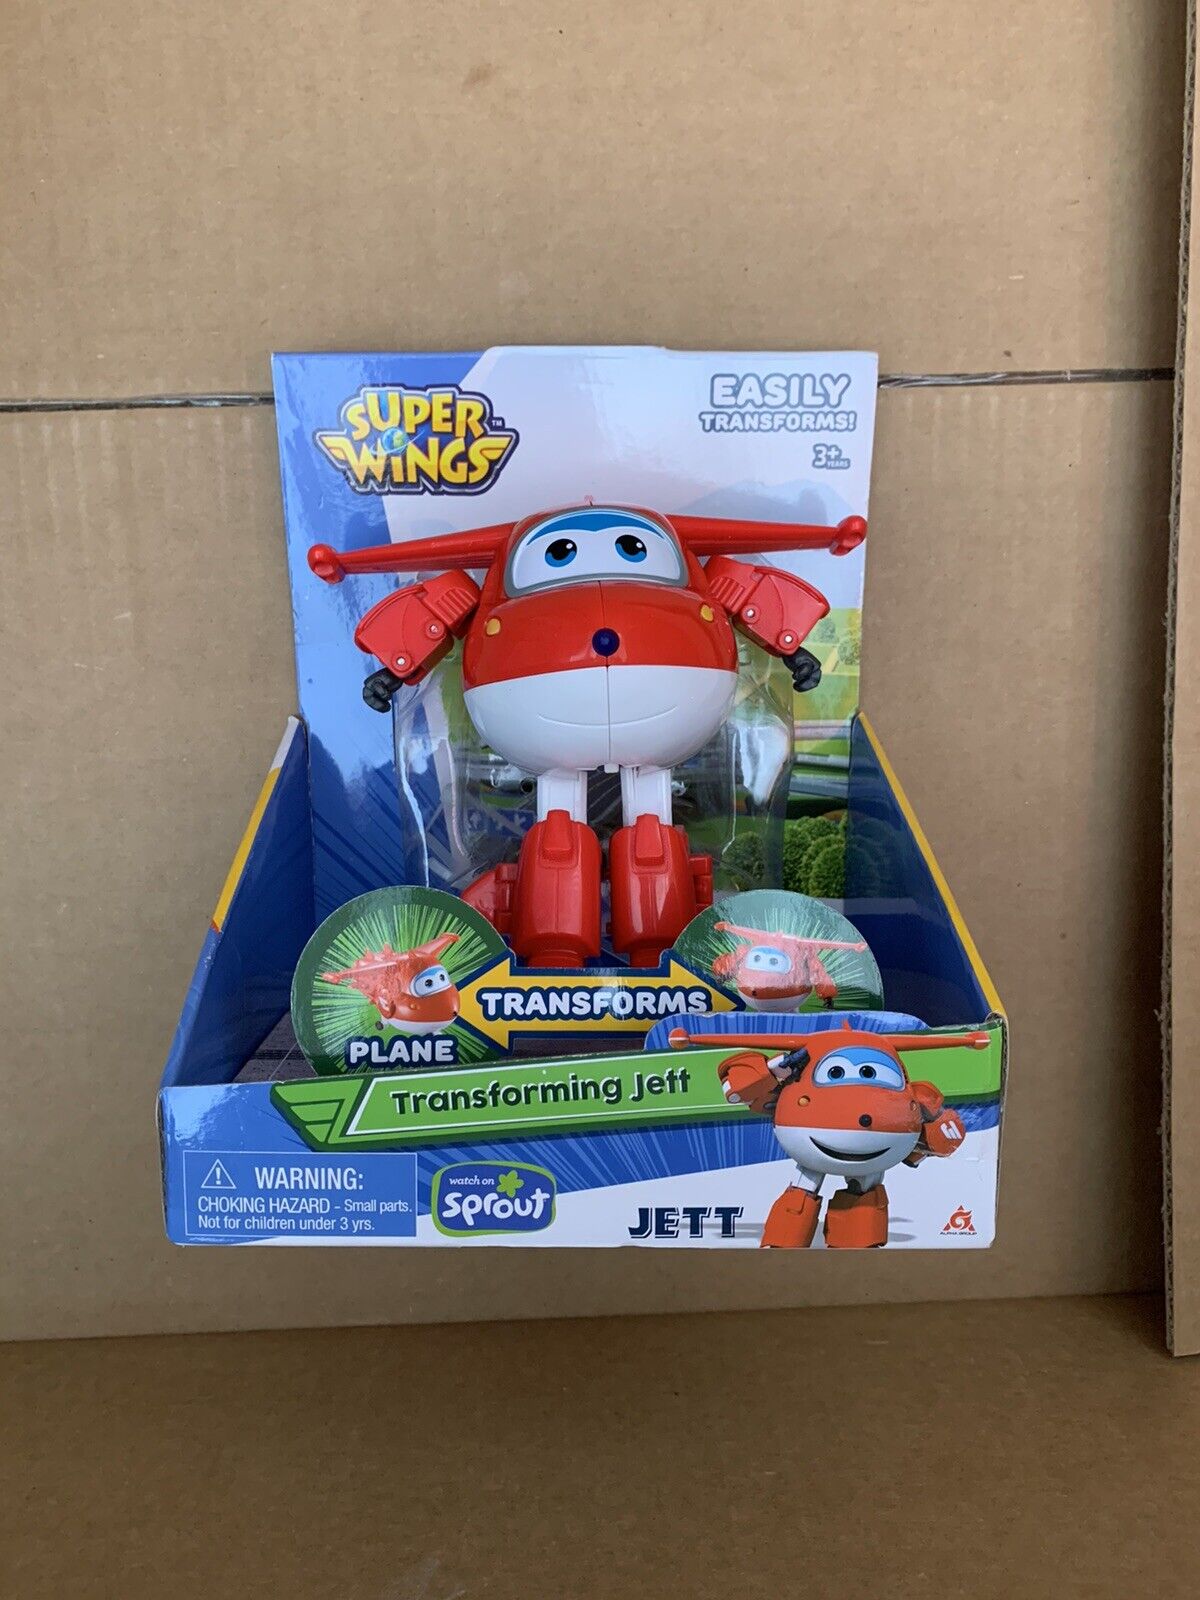 Super Wings - Transforming Jett Toy Figure, Plane, Bot, 5" Scale, Red